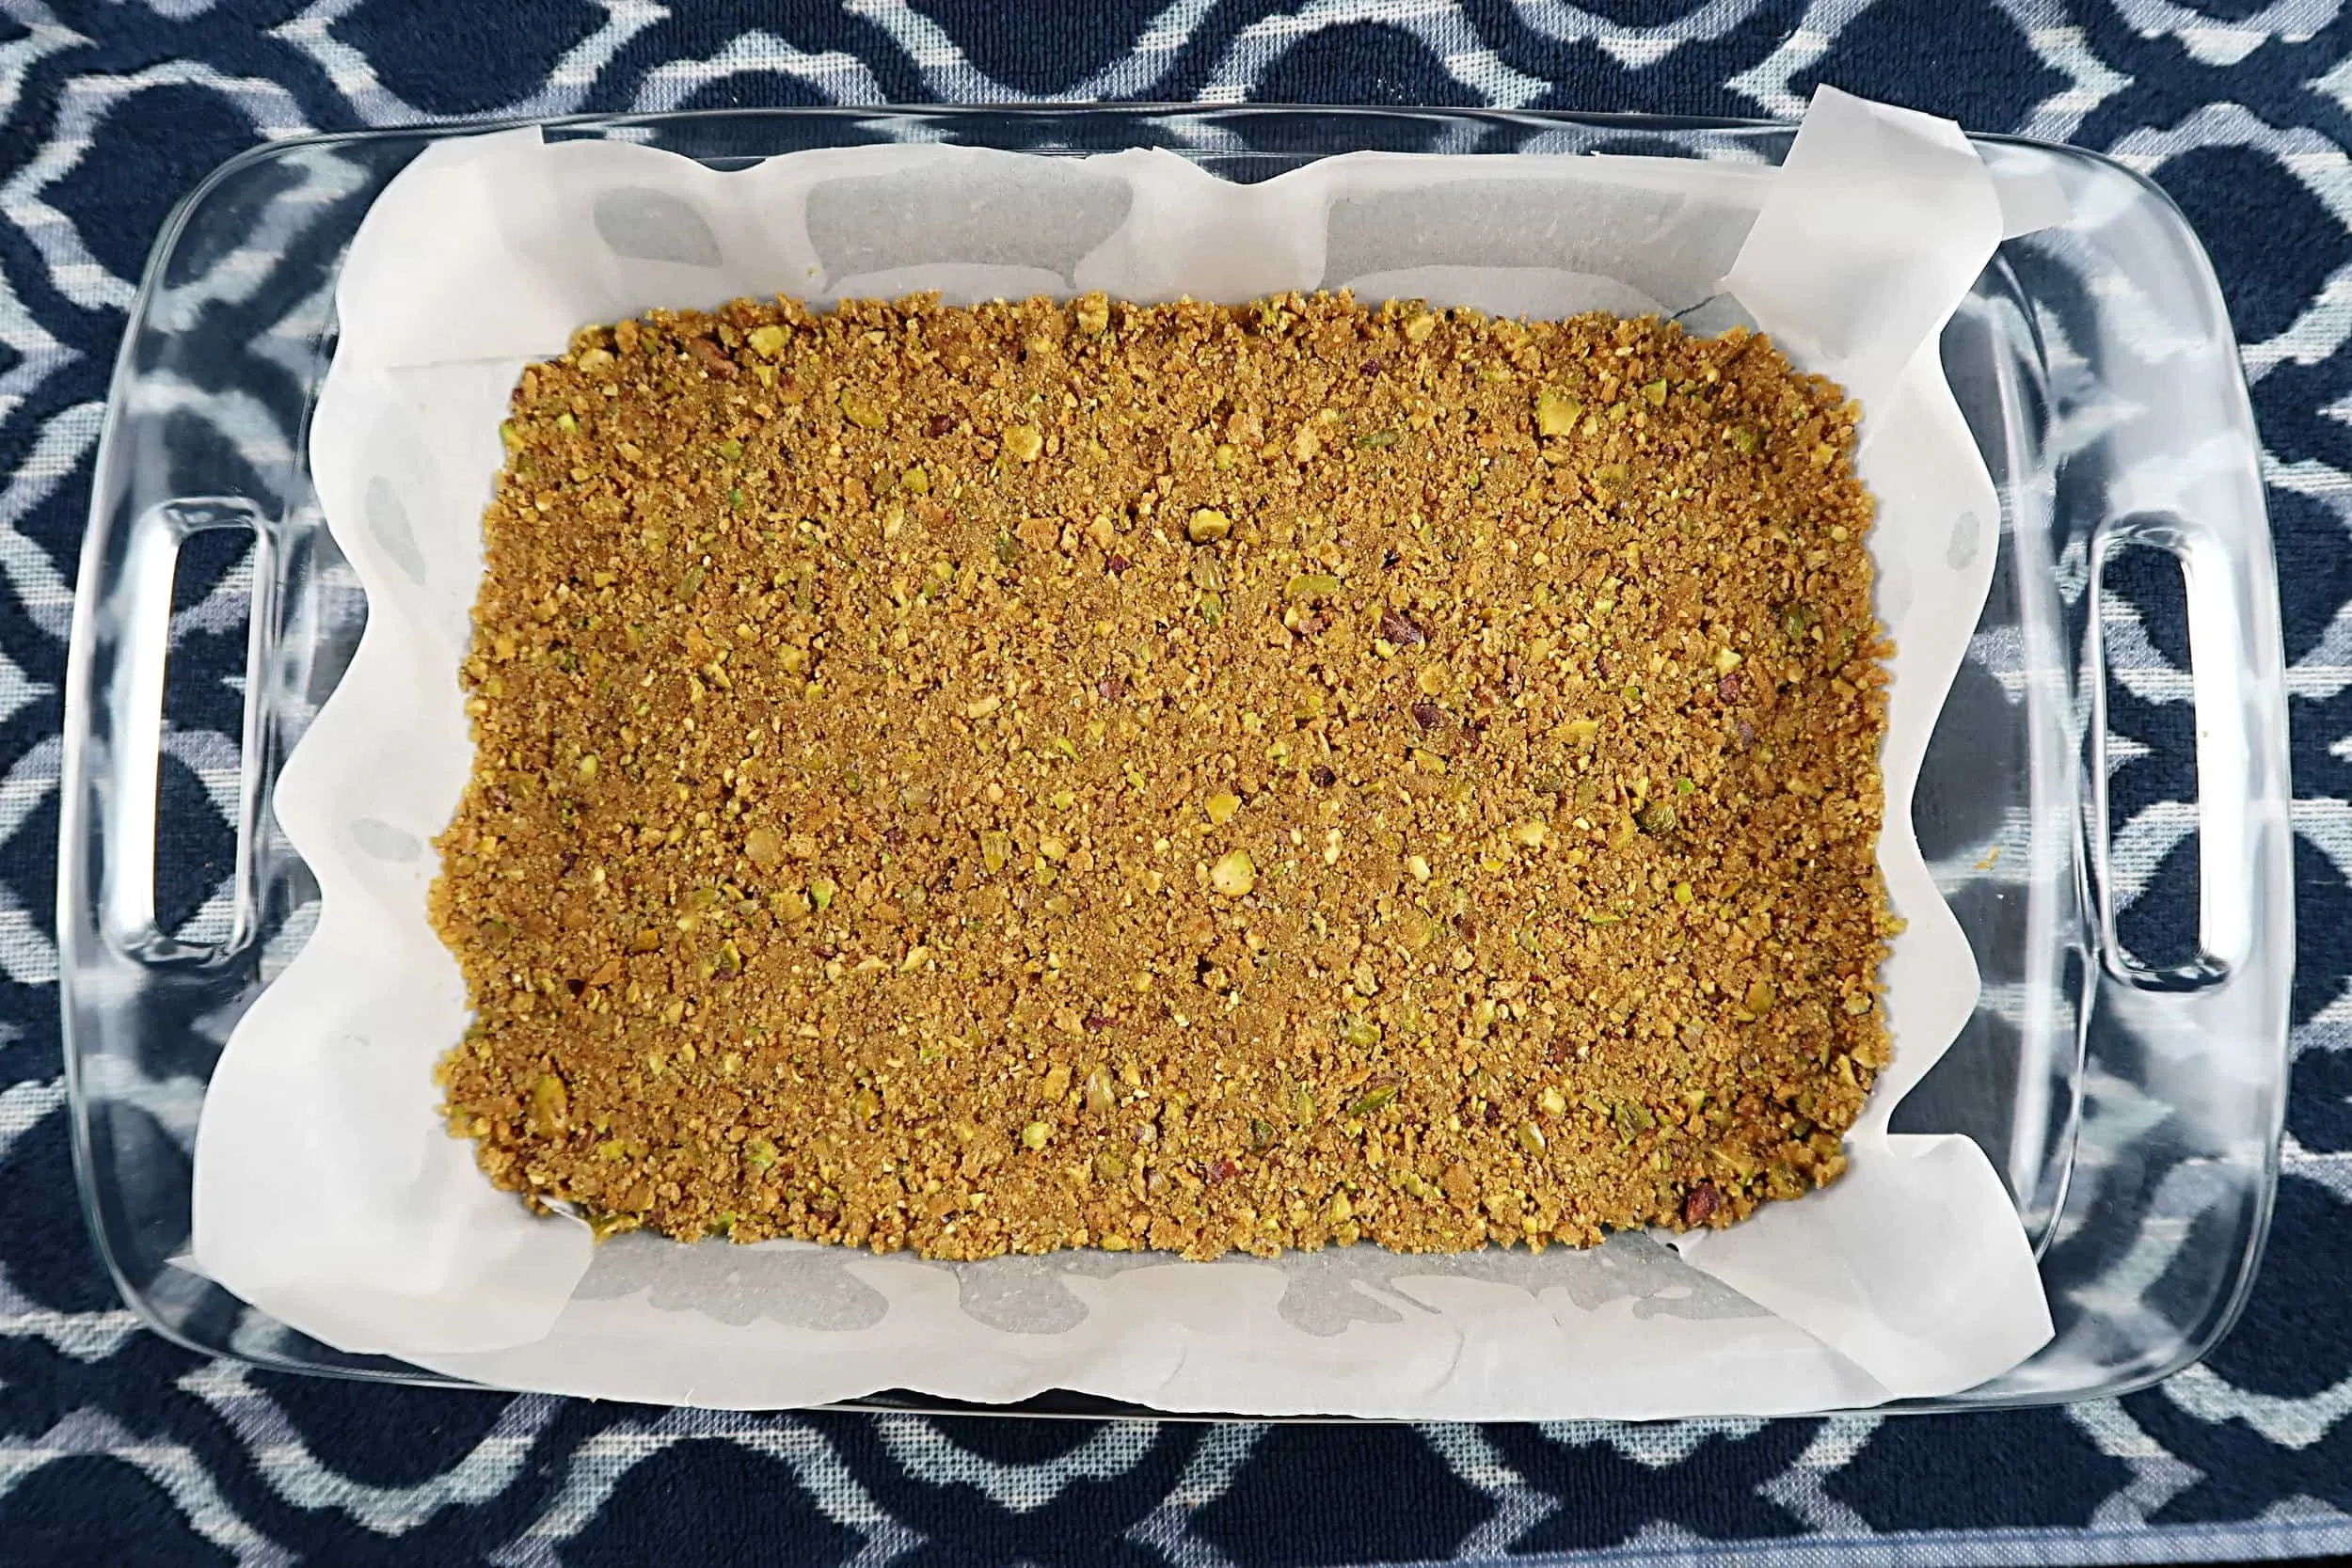 Pistachio and graham cracker crust pressed into a baking dish.